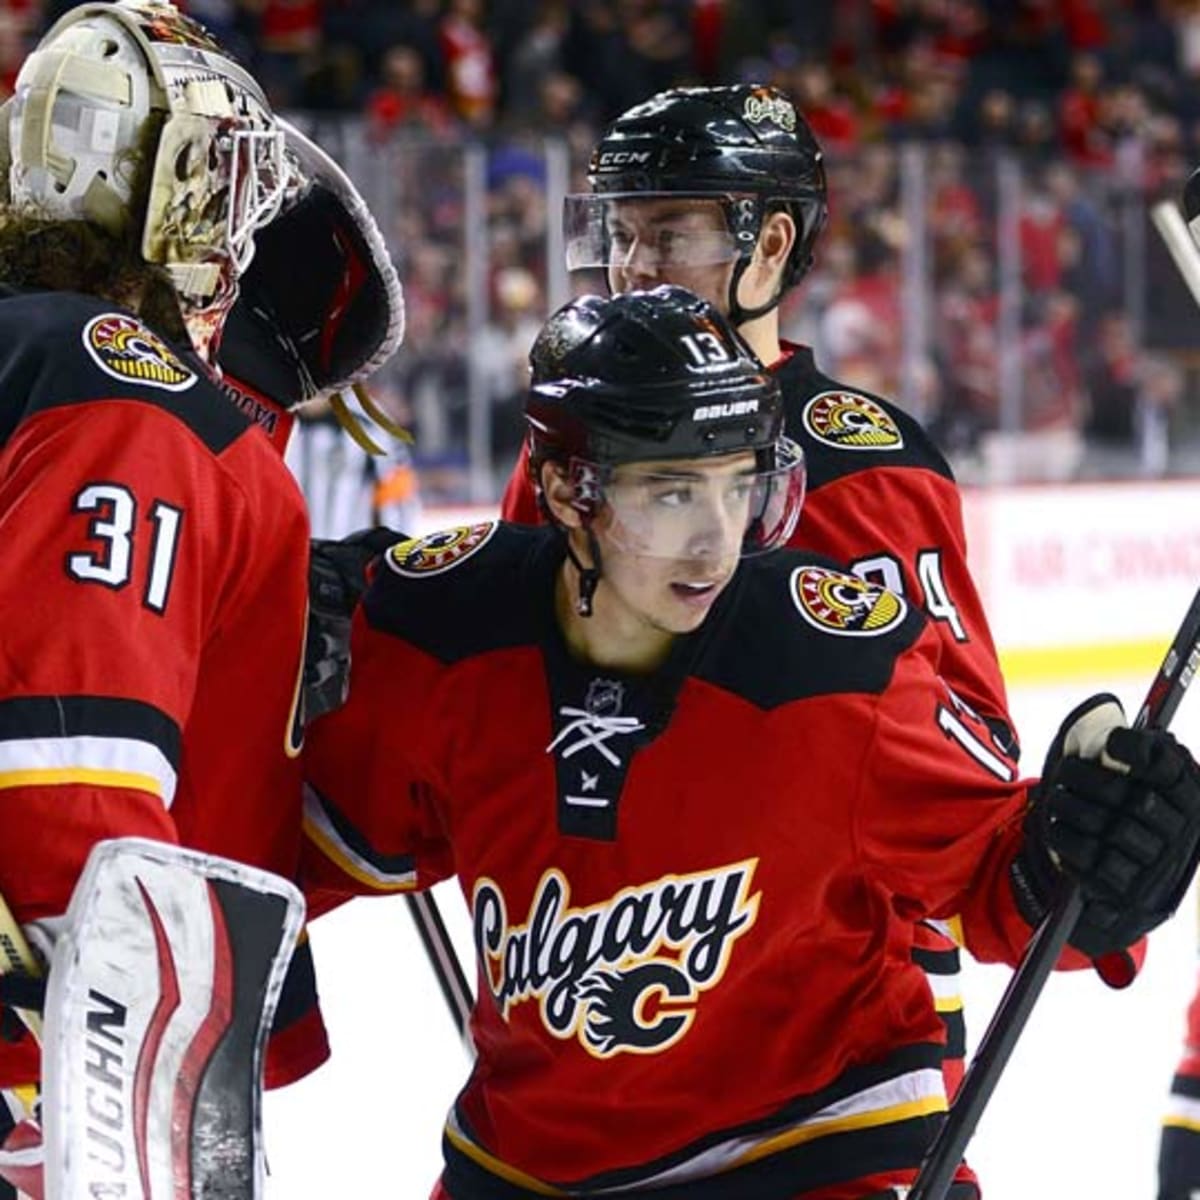 Johnny Gaudreau reaches 7-year deal with Blue Jackets